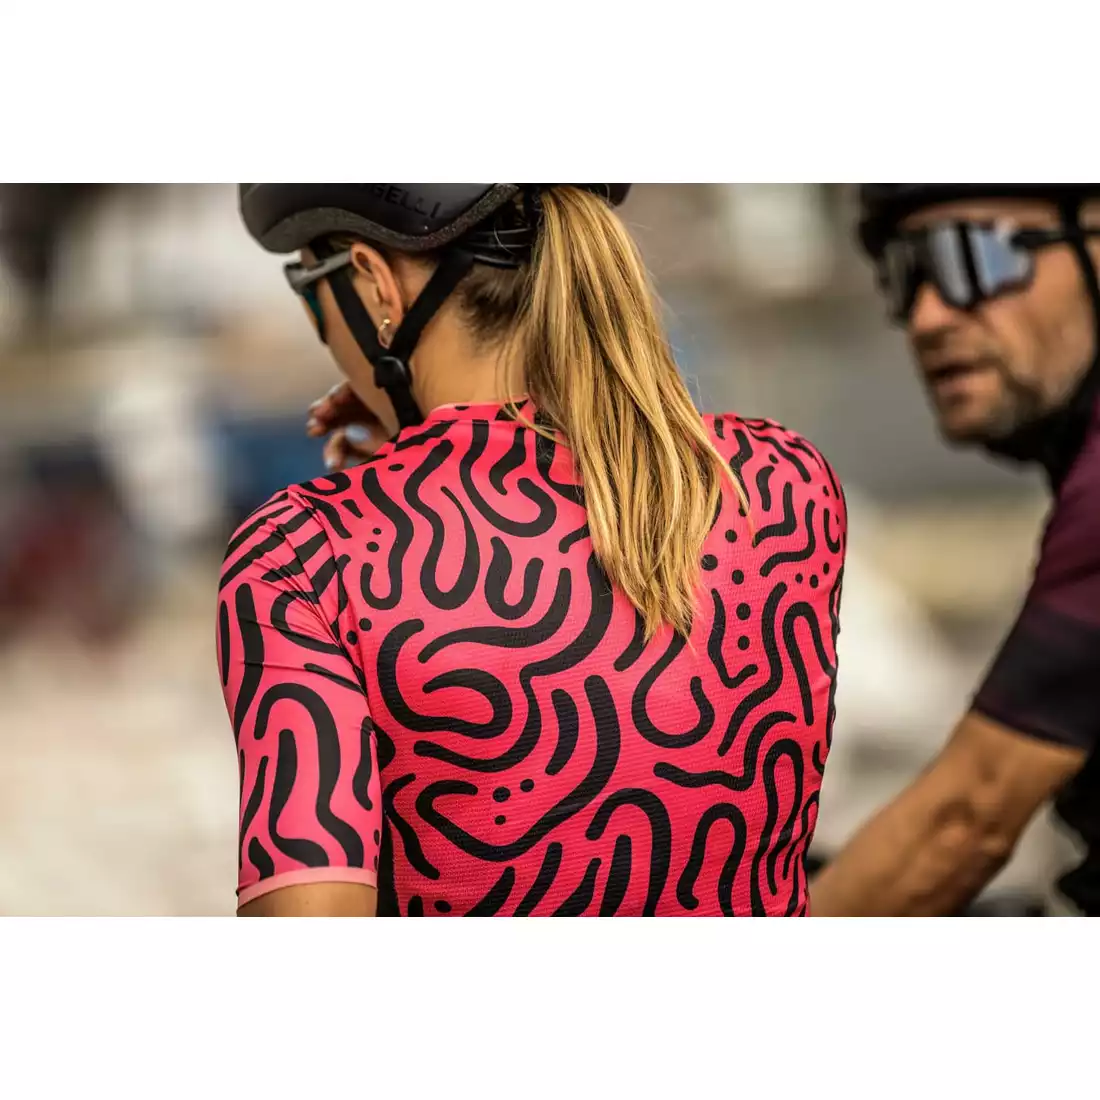 Rogelli ABSTRACT women's cycling jersey, pink and black